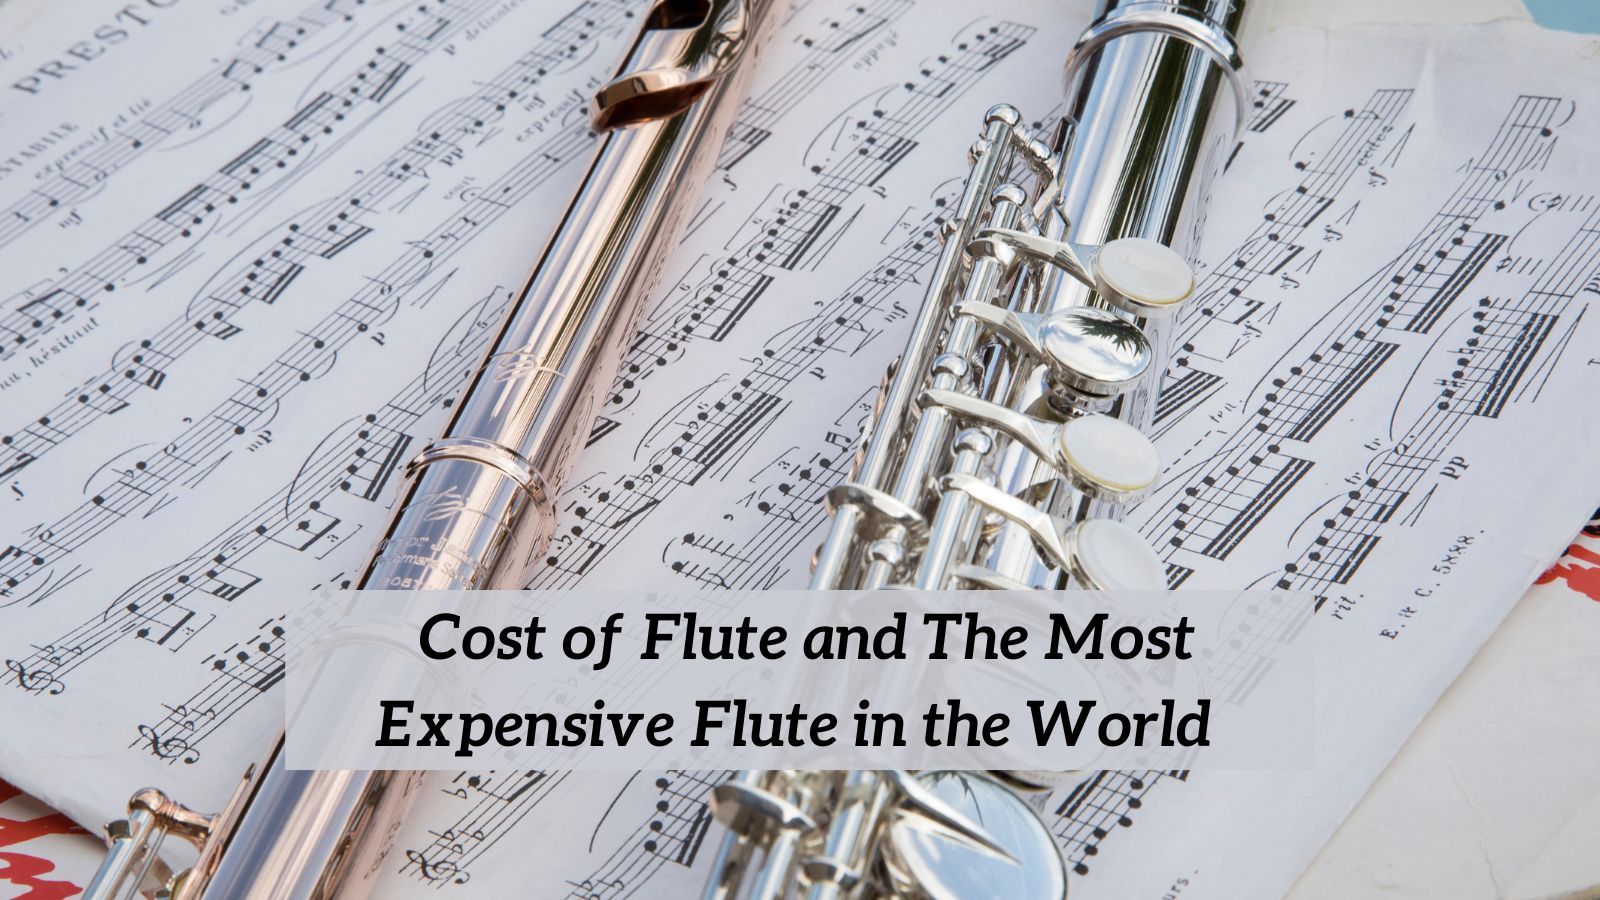 Cost of Flute and Most Expensive Flute in the World 